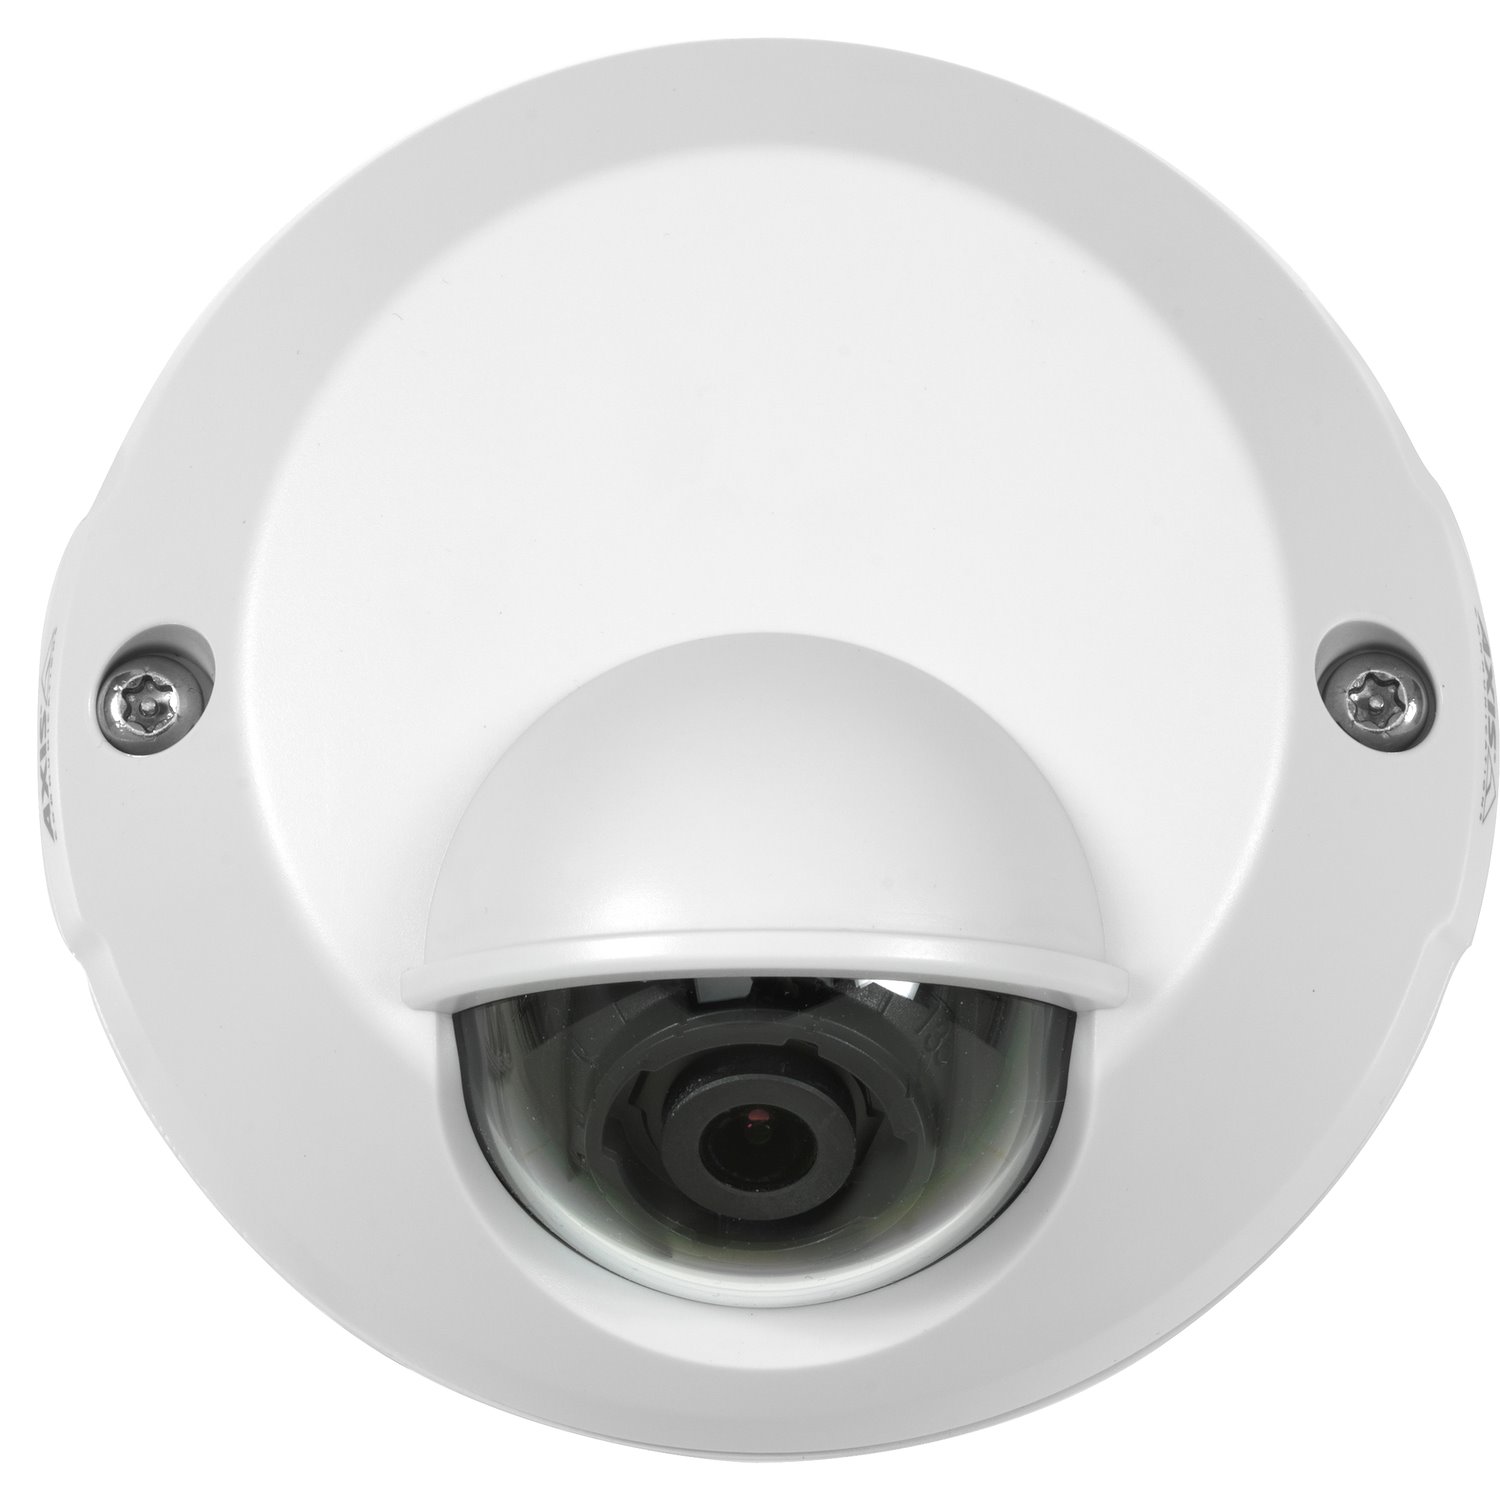 AXIS M3114-VE Network Camera